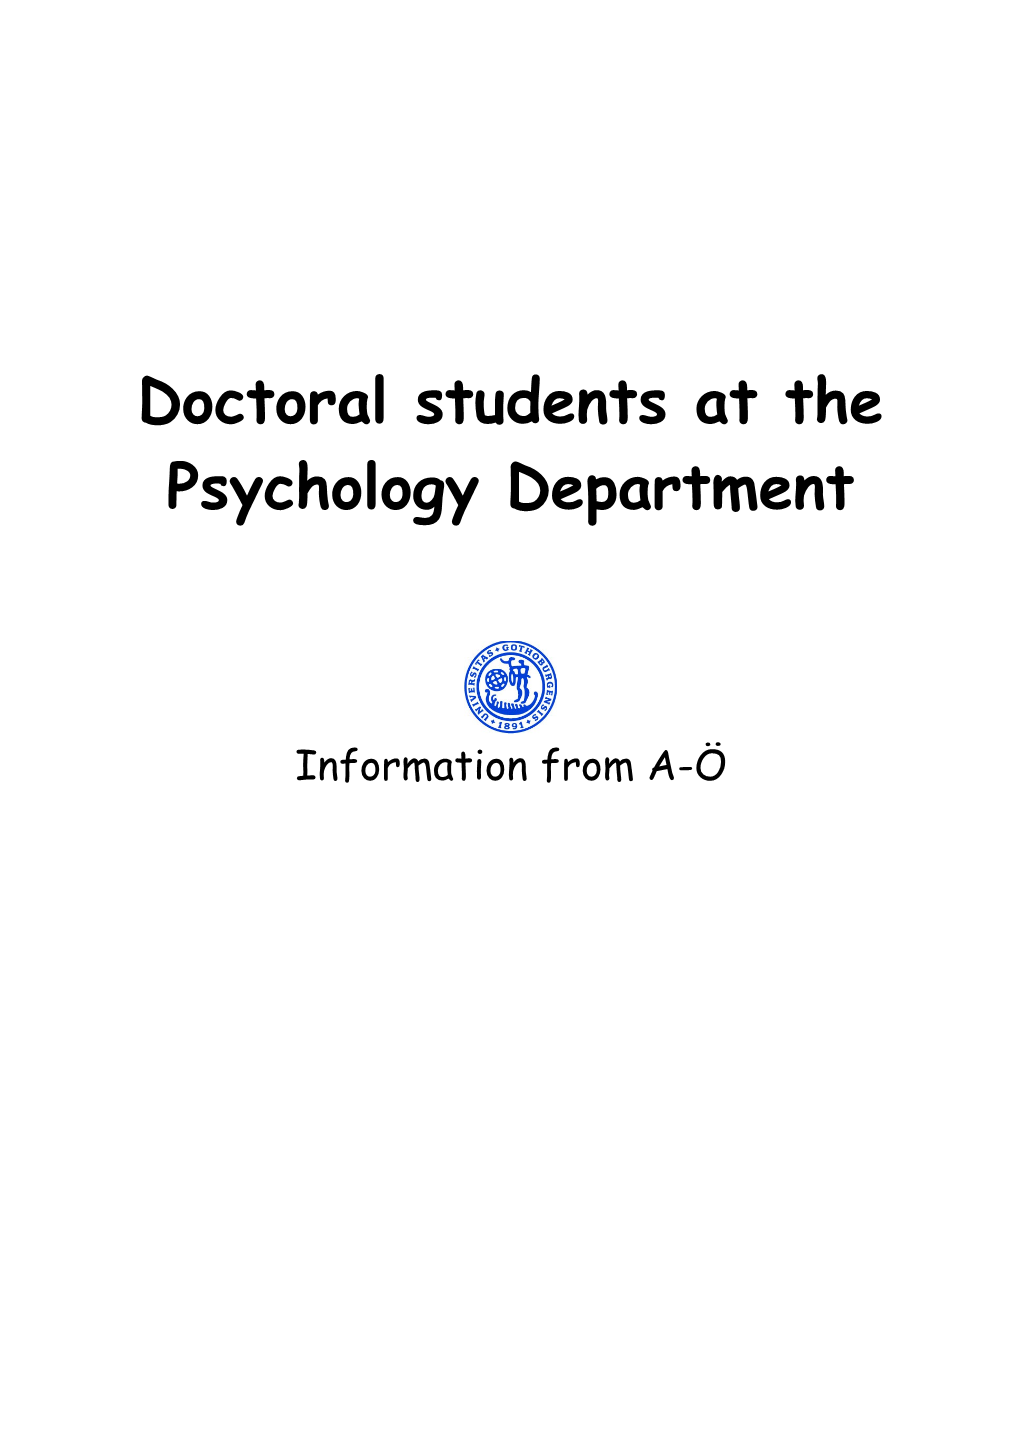 Doctoral Students at the Psychology Department